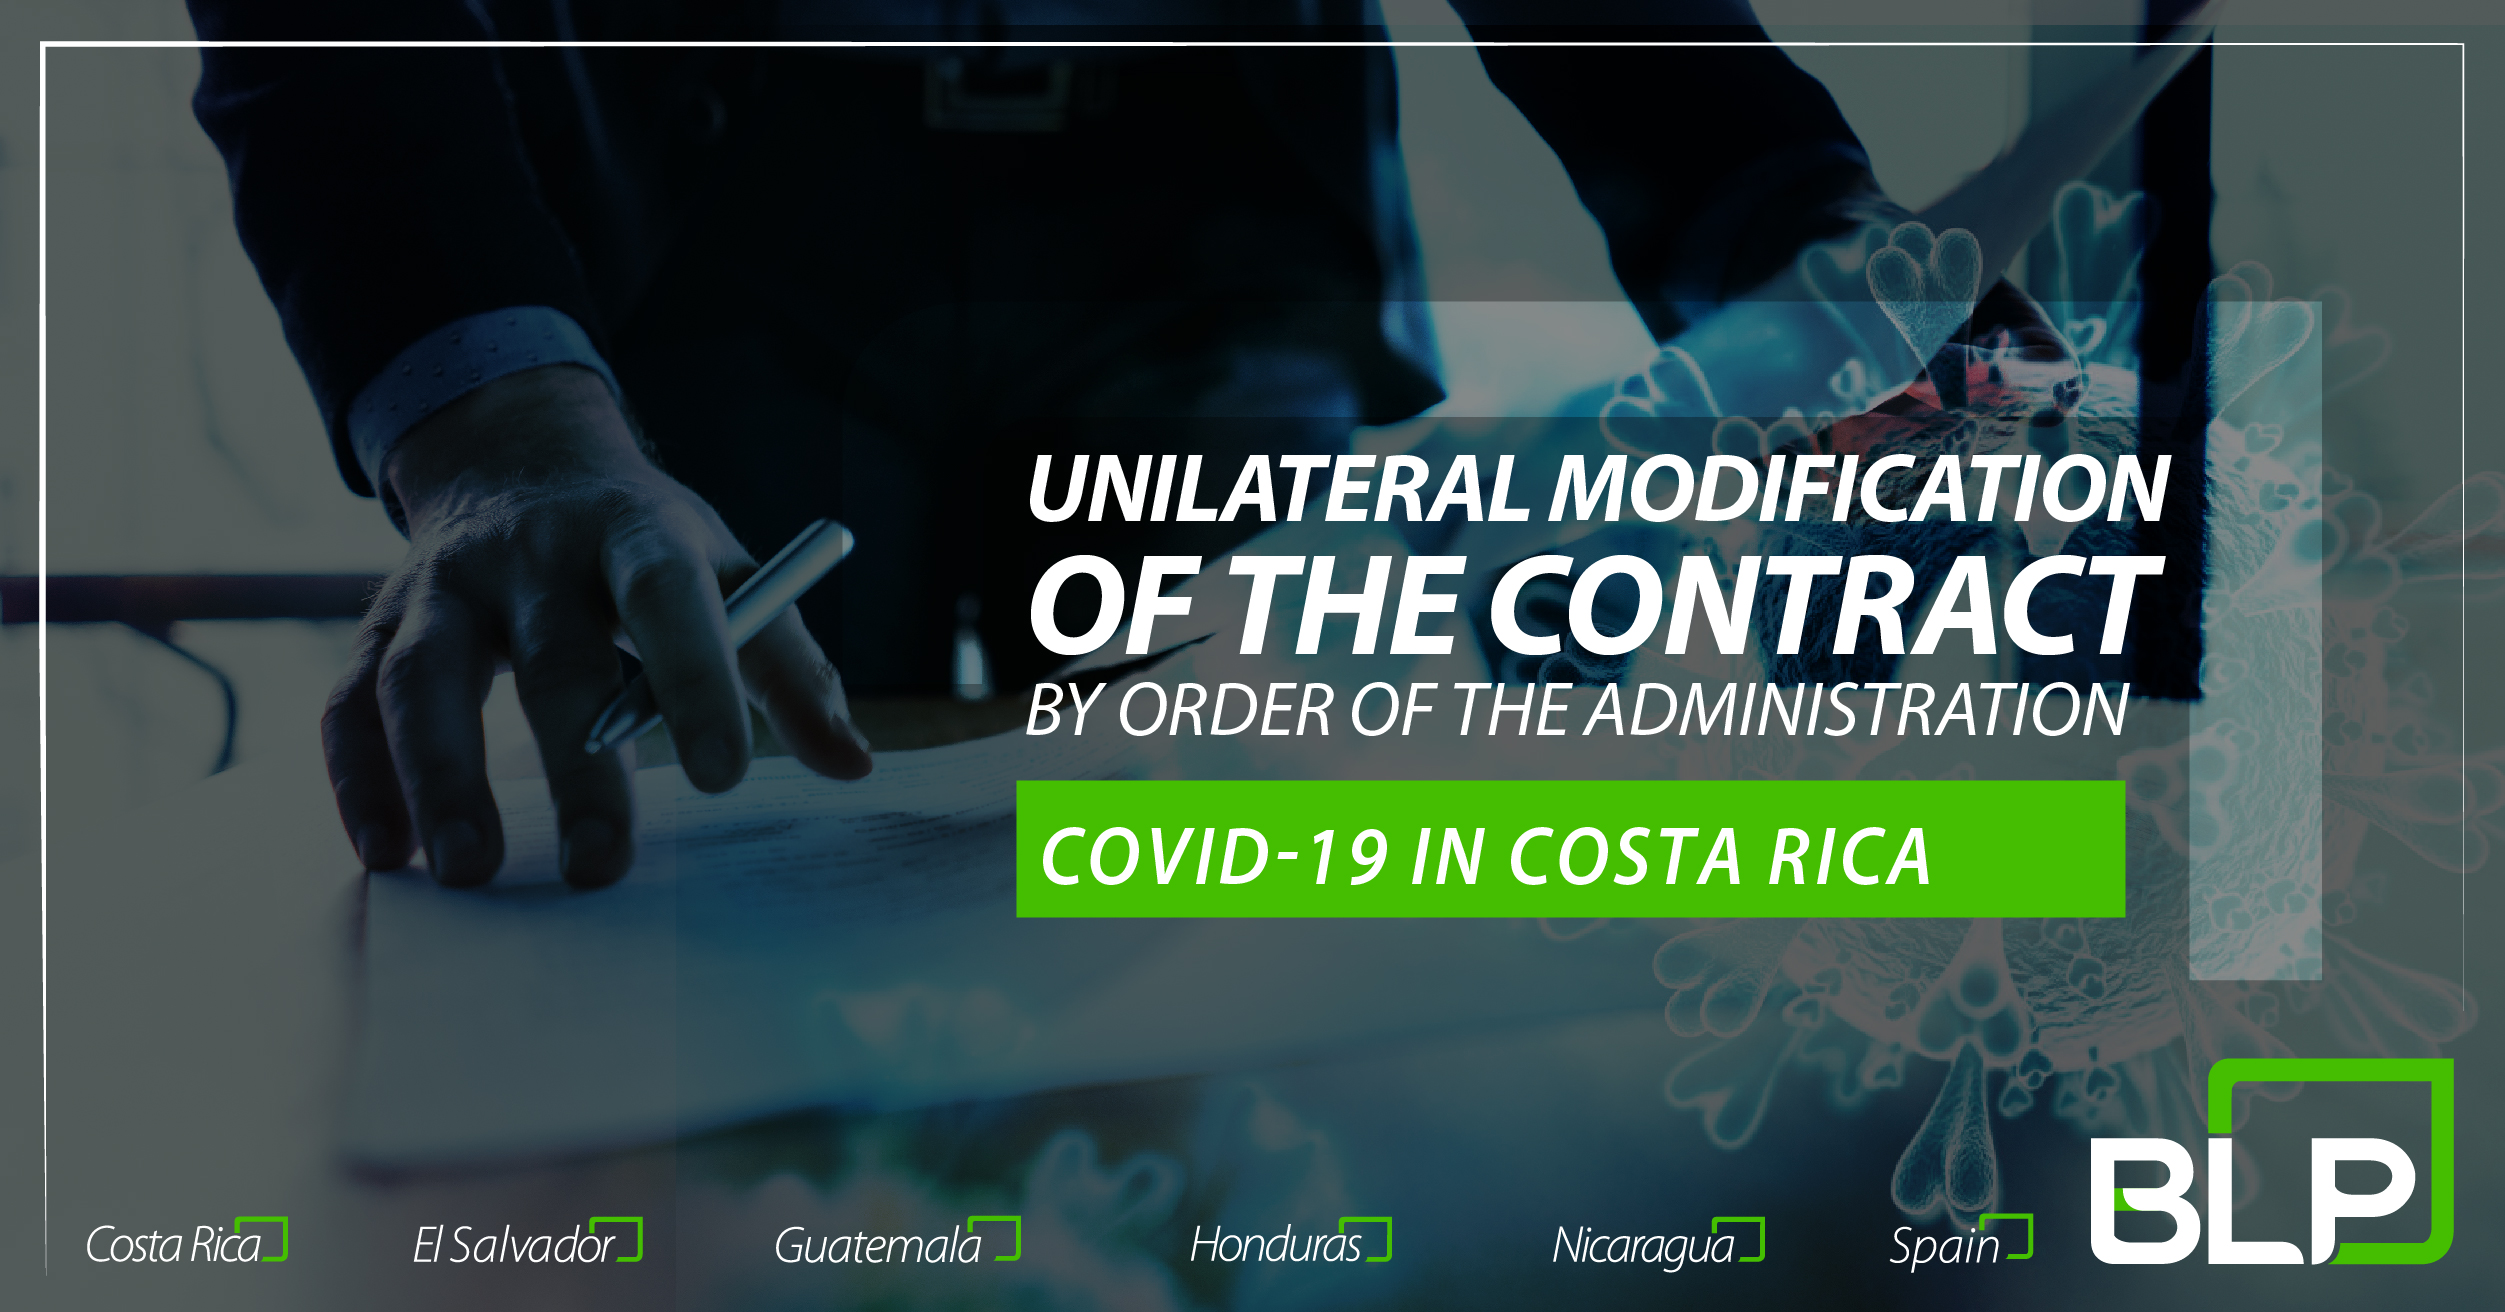 Unilateral modification of the contract by order of the Administration.